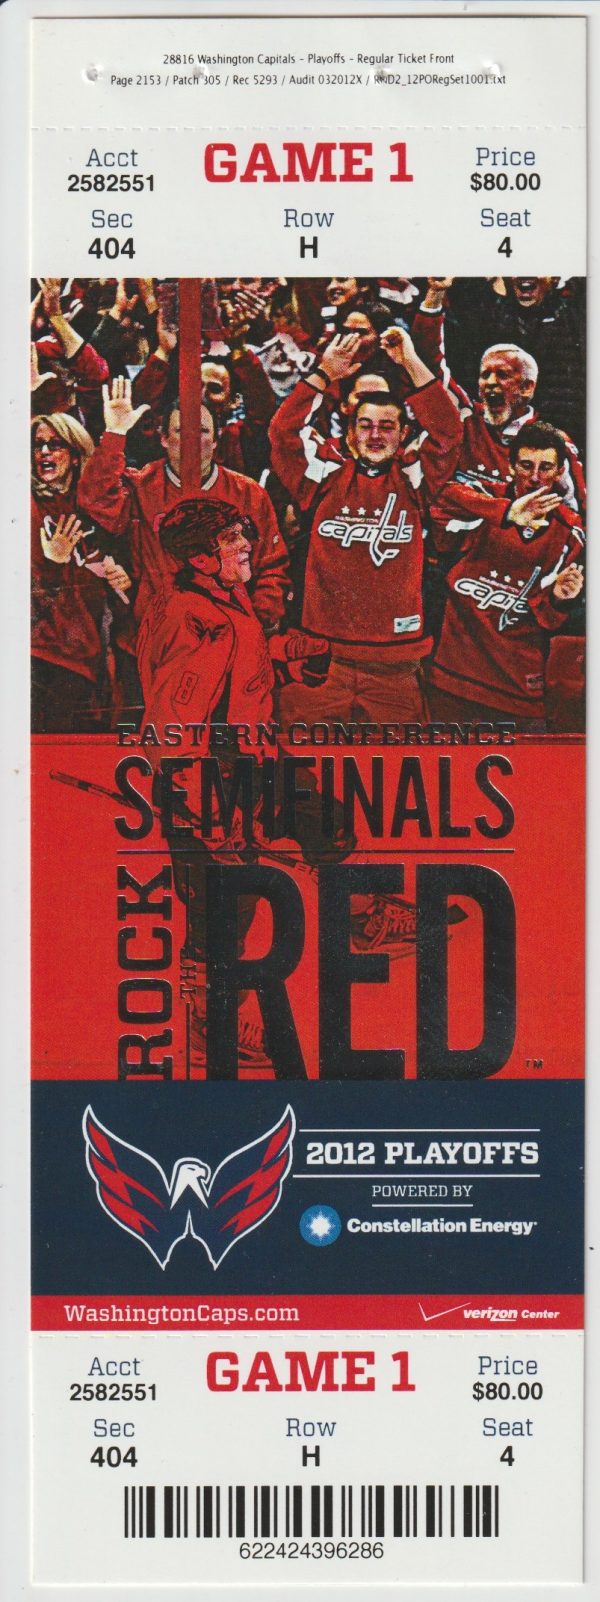 2012 Capitals 1st Round Gm 3 Full Ticket vs Bruins Ovechkin